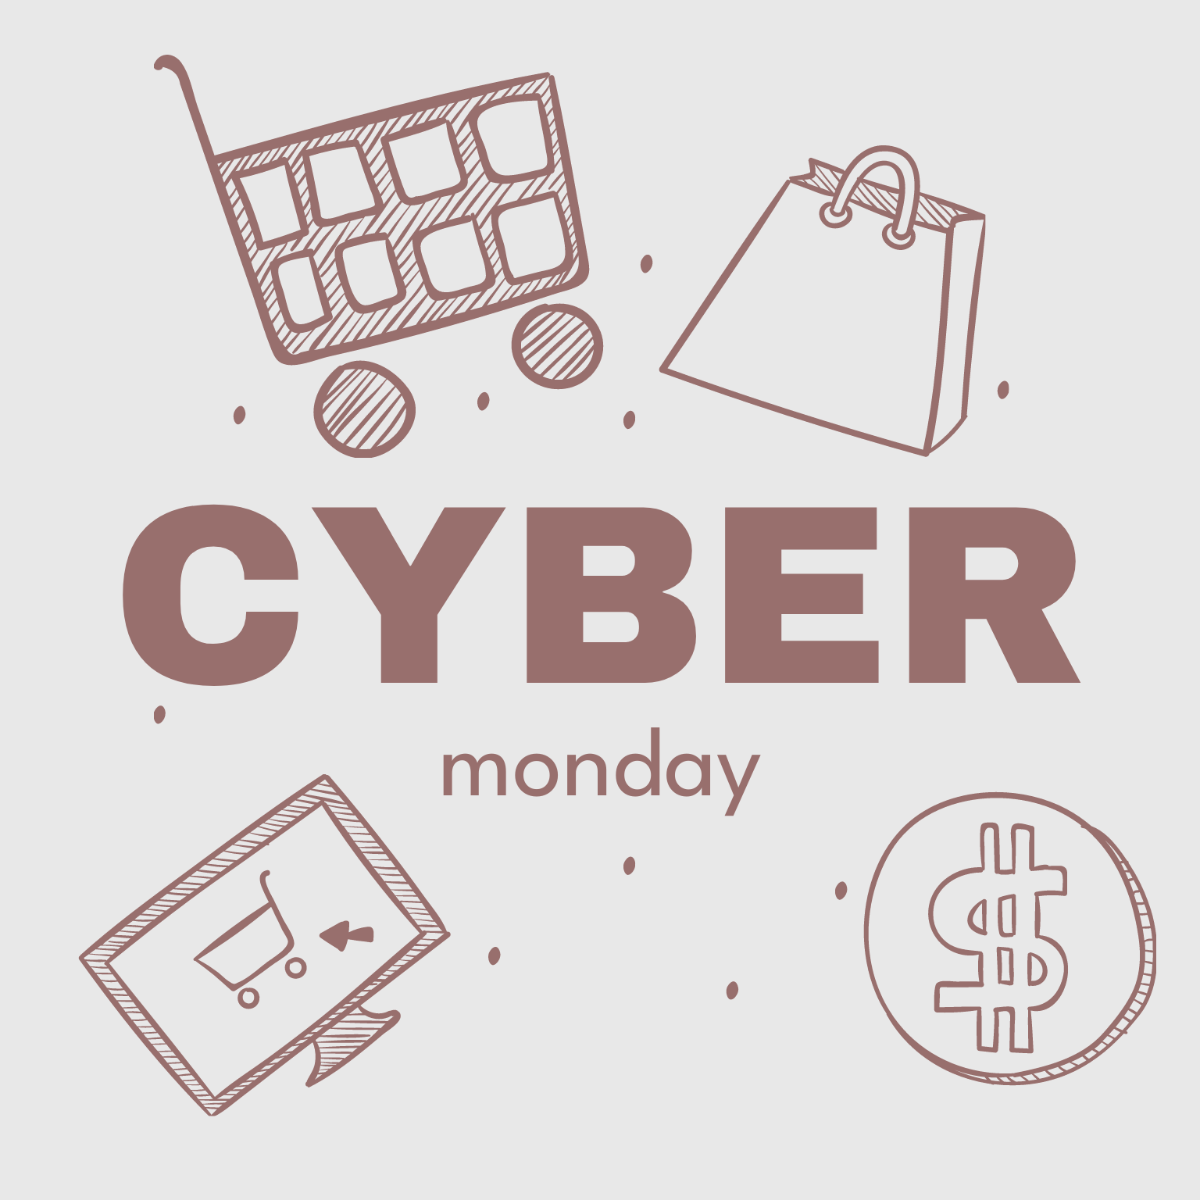 Free Cyber Monday Sketch Vector Template